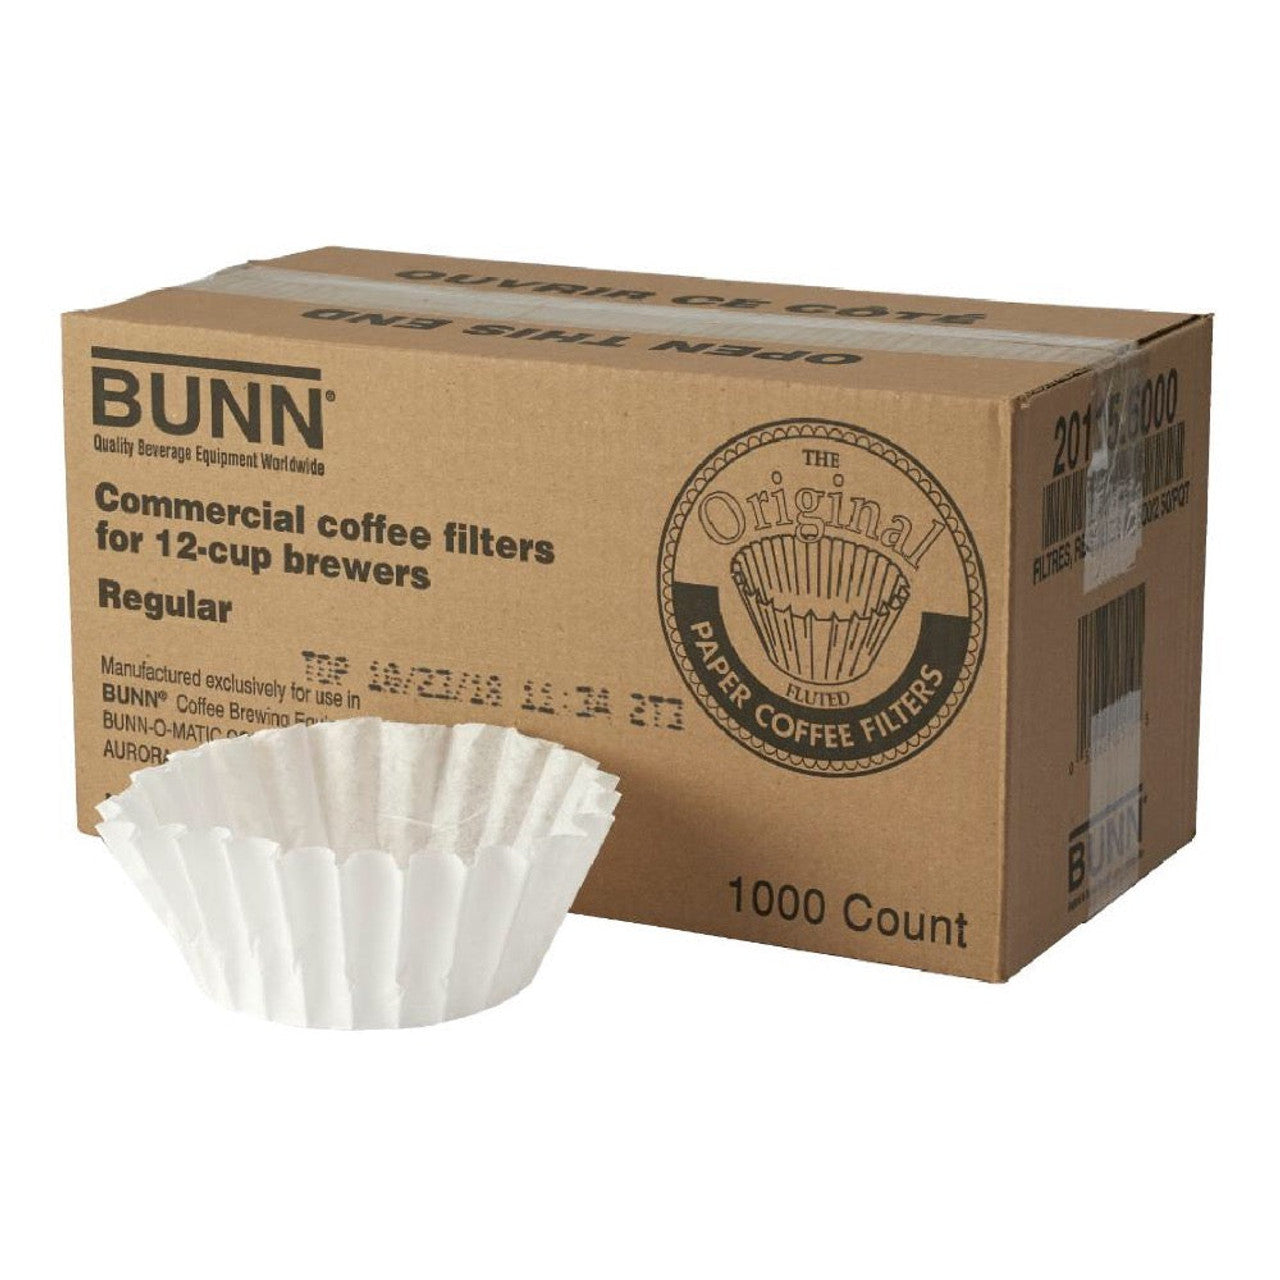 Bunn Commercial Coffee Filters 1000ct